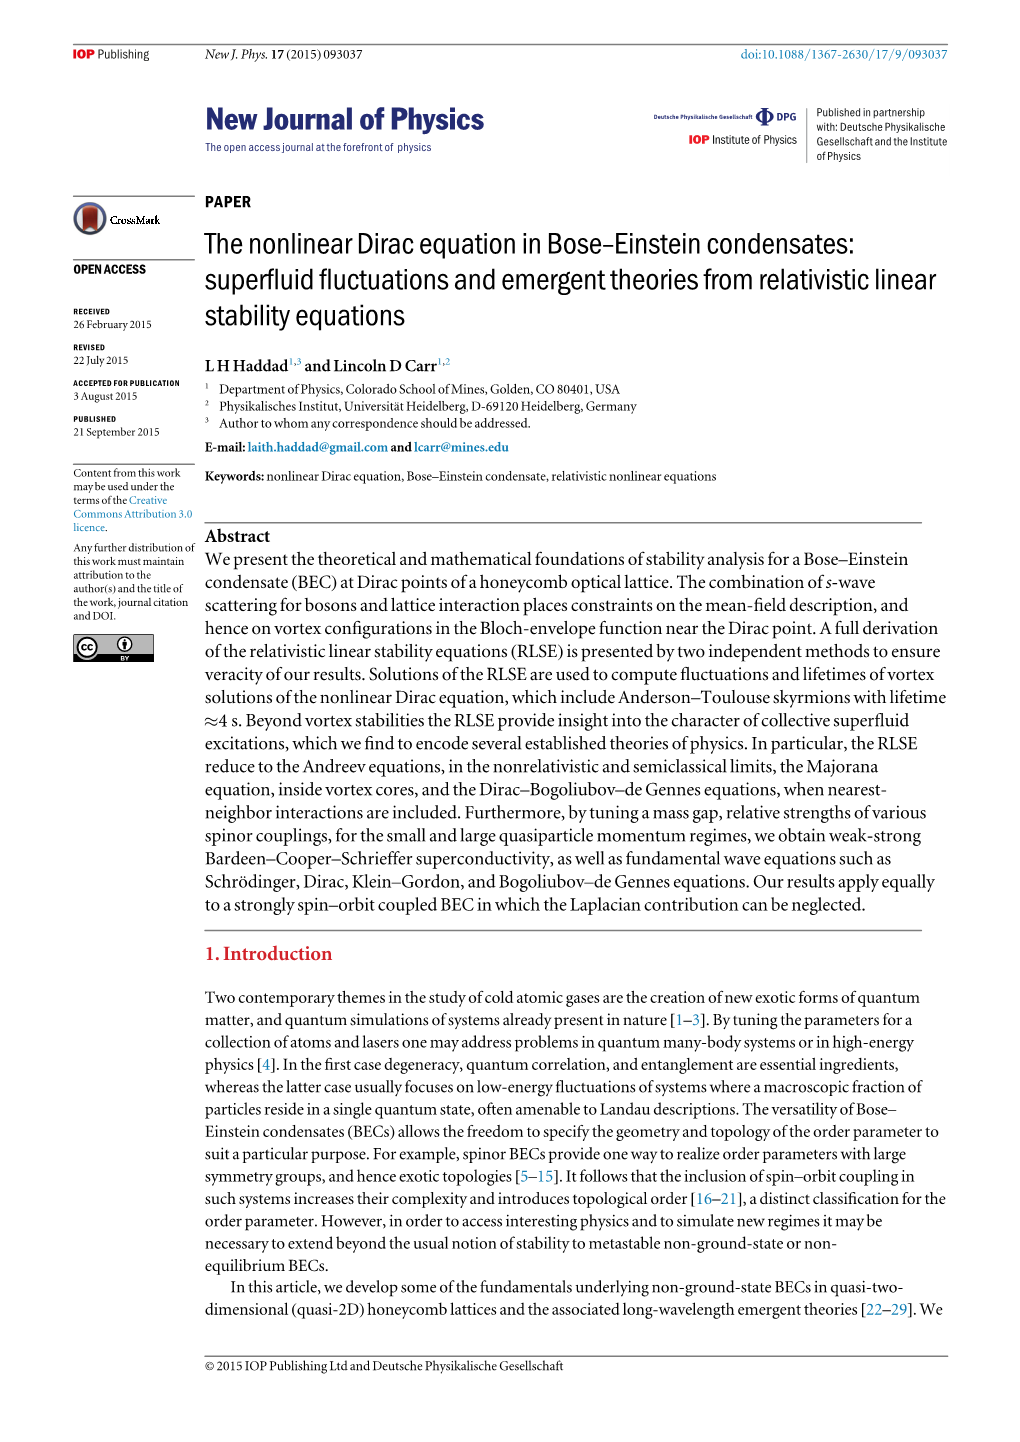 The Nonlinear Dirac Equation in Bose–Einstein Condensates: OPEN ACCESS Superﬂuid ﬂuctuations and Emergent Theories from Relativistic Linear